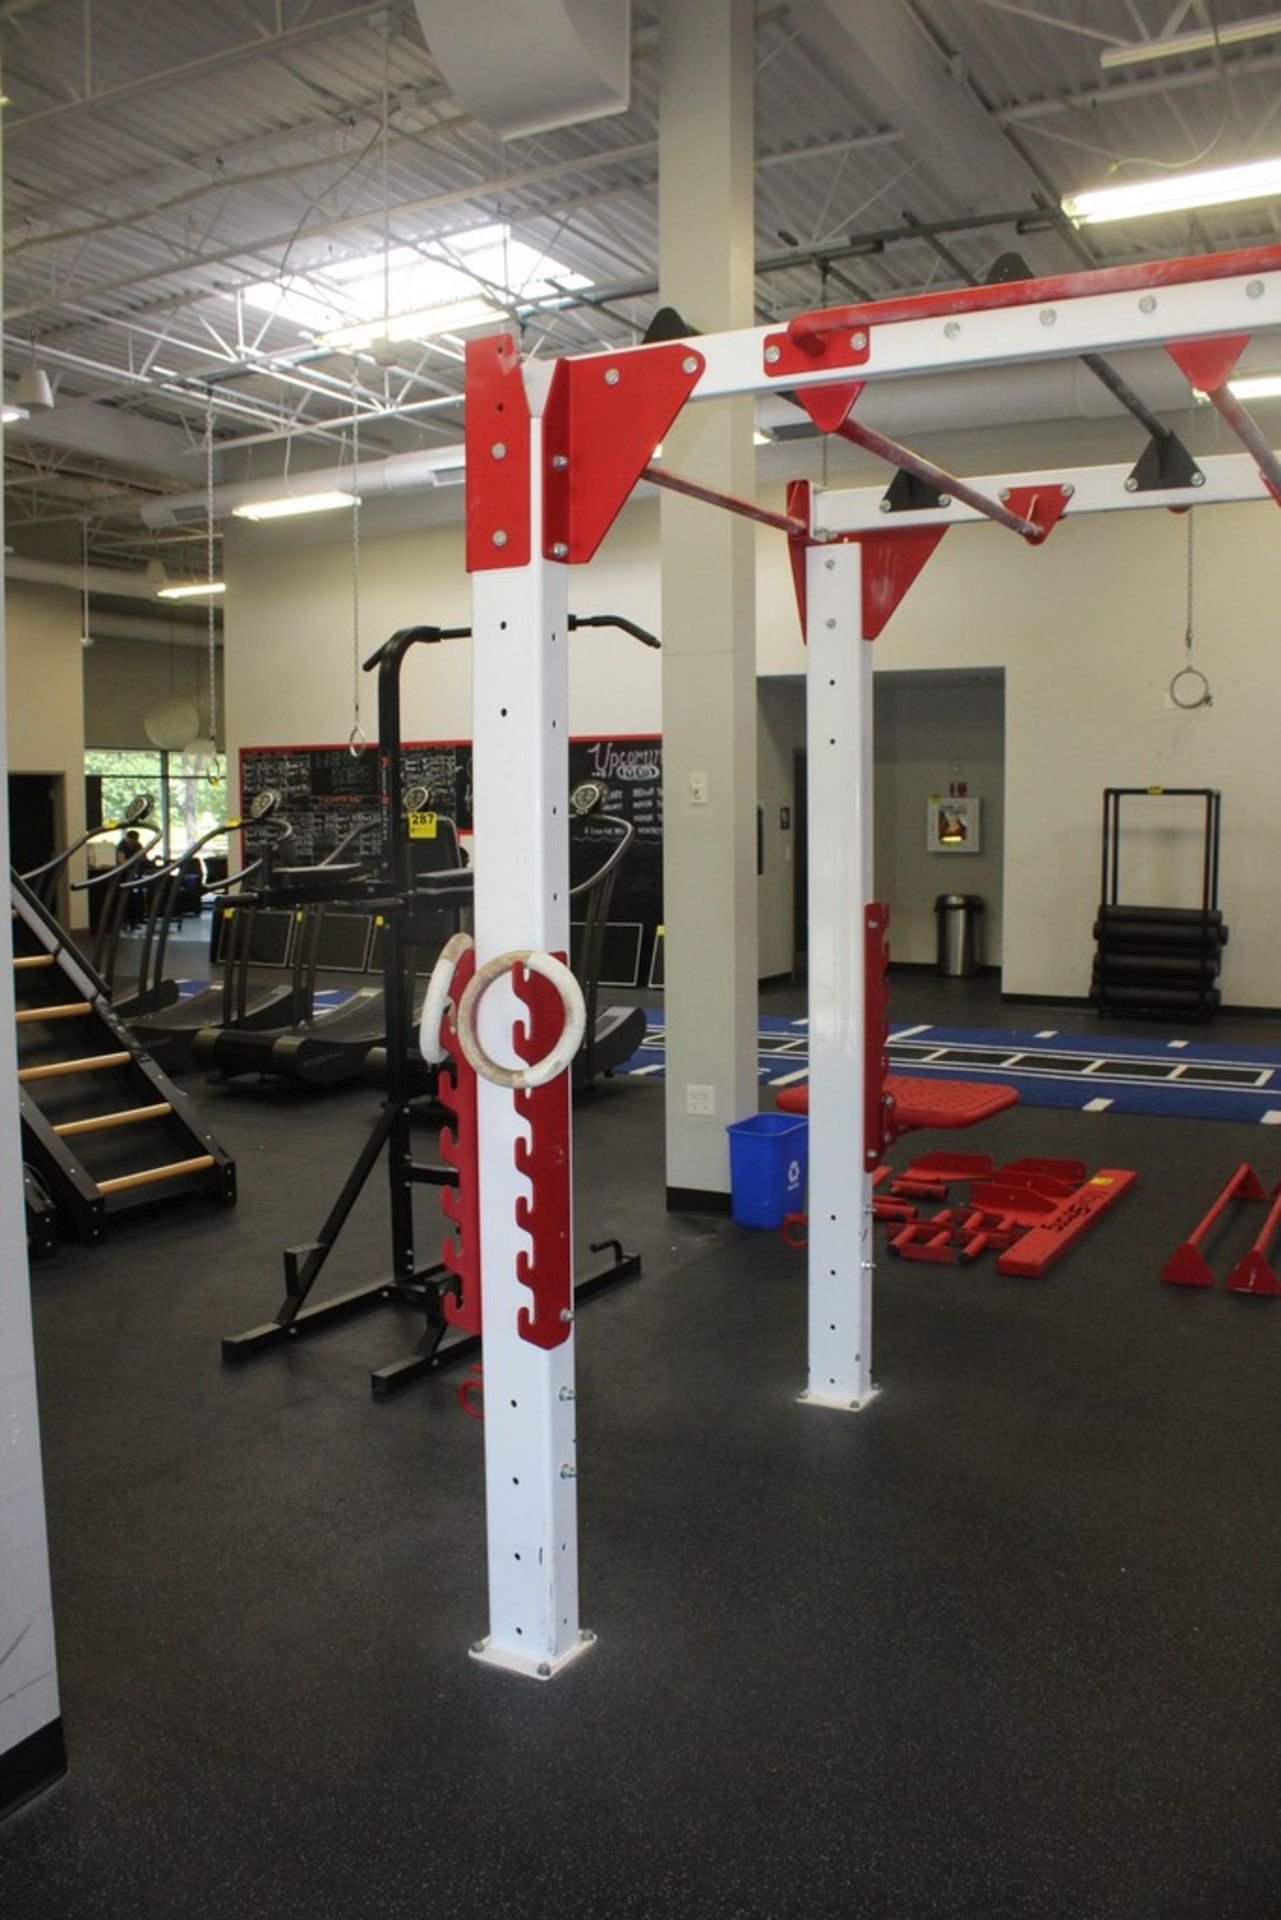 MOVESTRONG MODULAR MONKEY BAR SECTION, 10' X 5', WITH OUTER SUPPORT STRUCTURE - Image 5 of 5